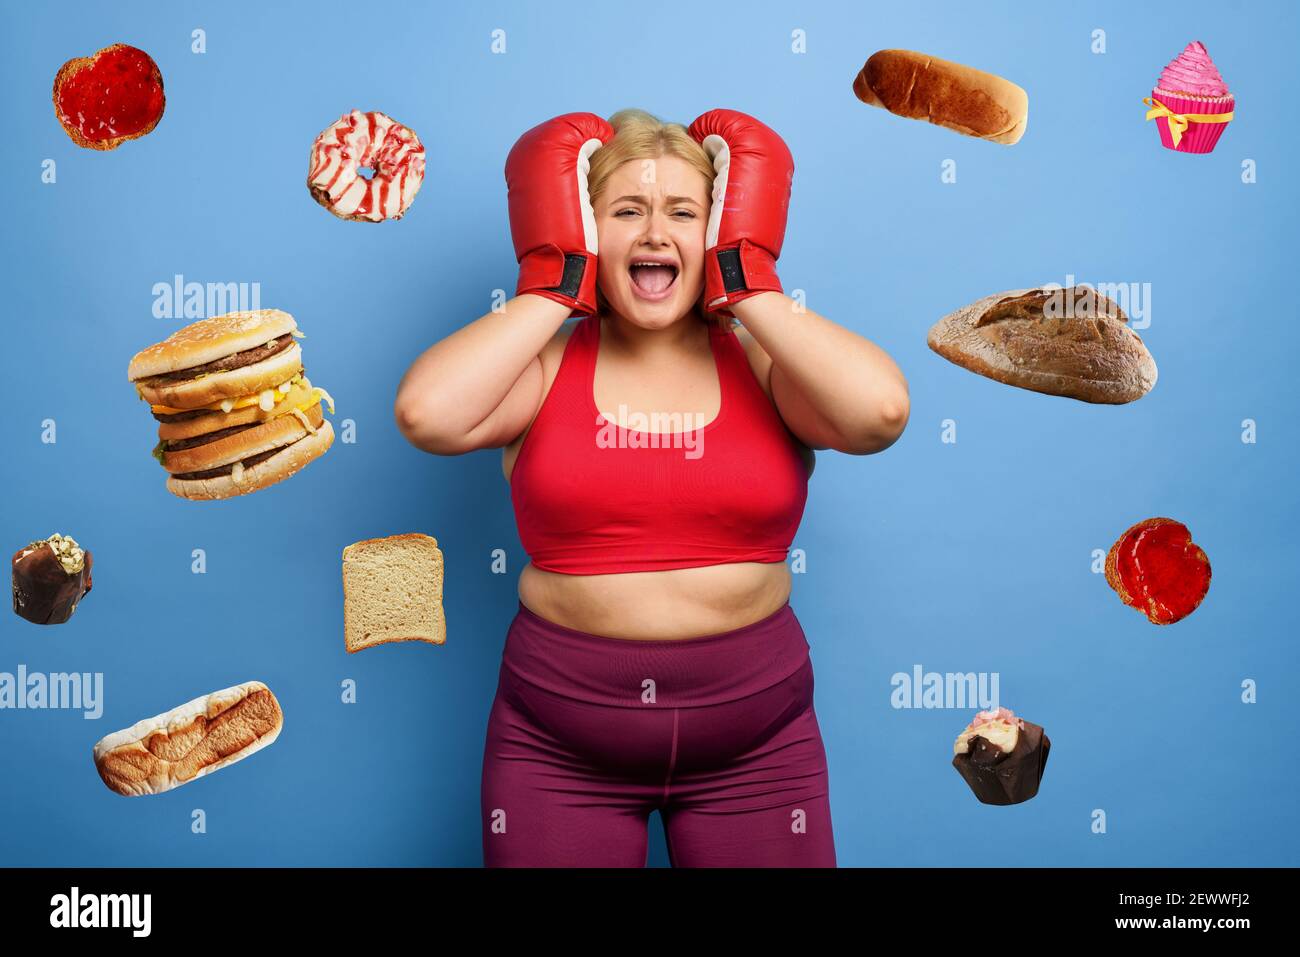 Fat girl is worried because she cannot lose weight and always think about eating. purple background Stock Photo